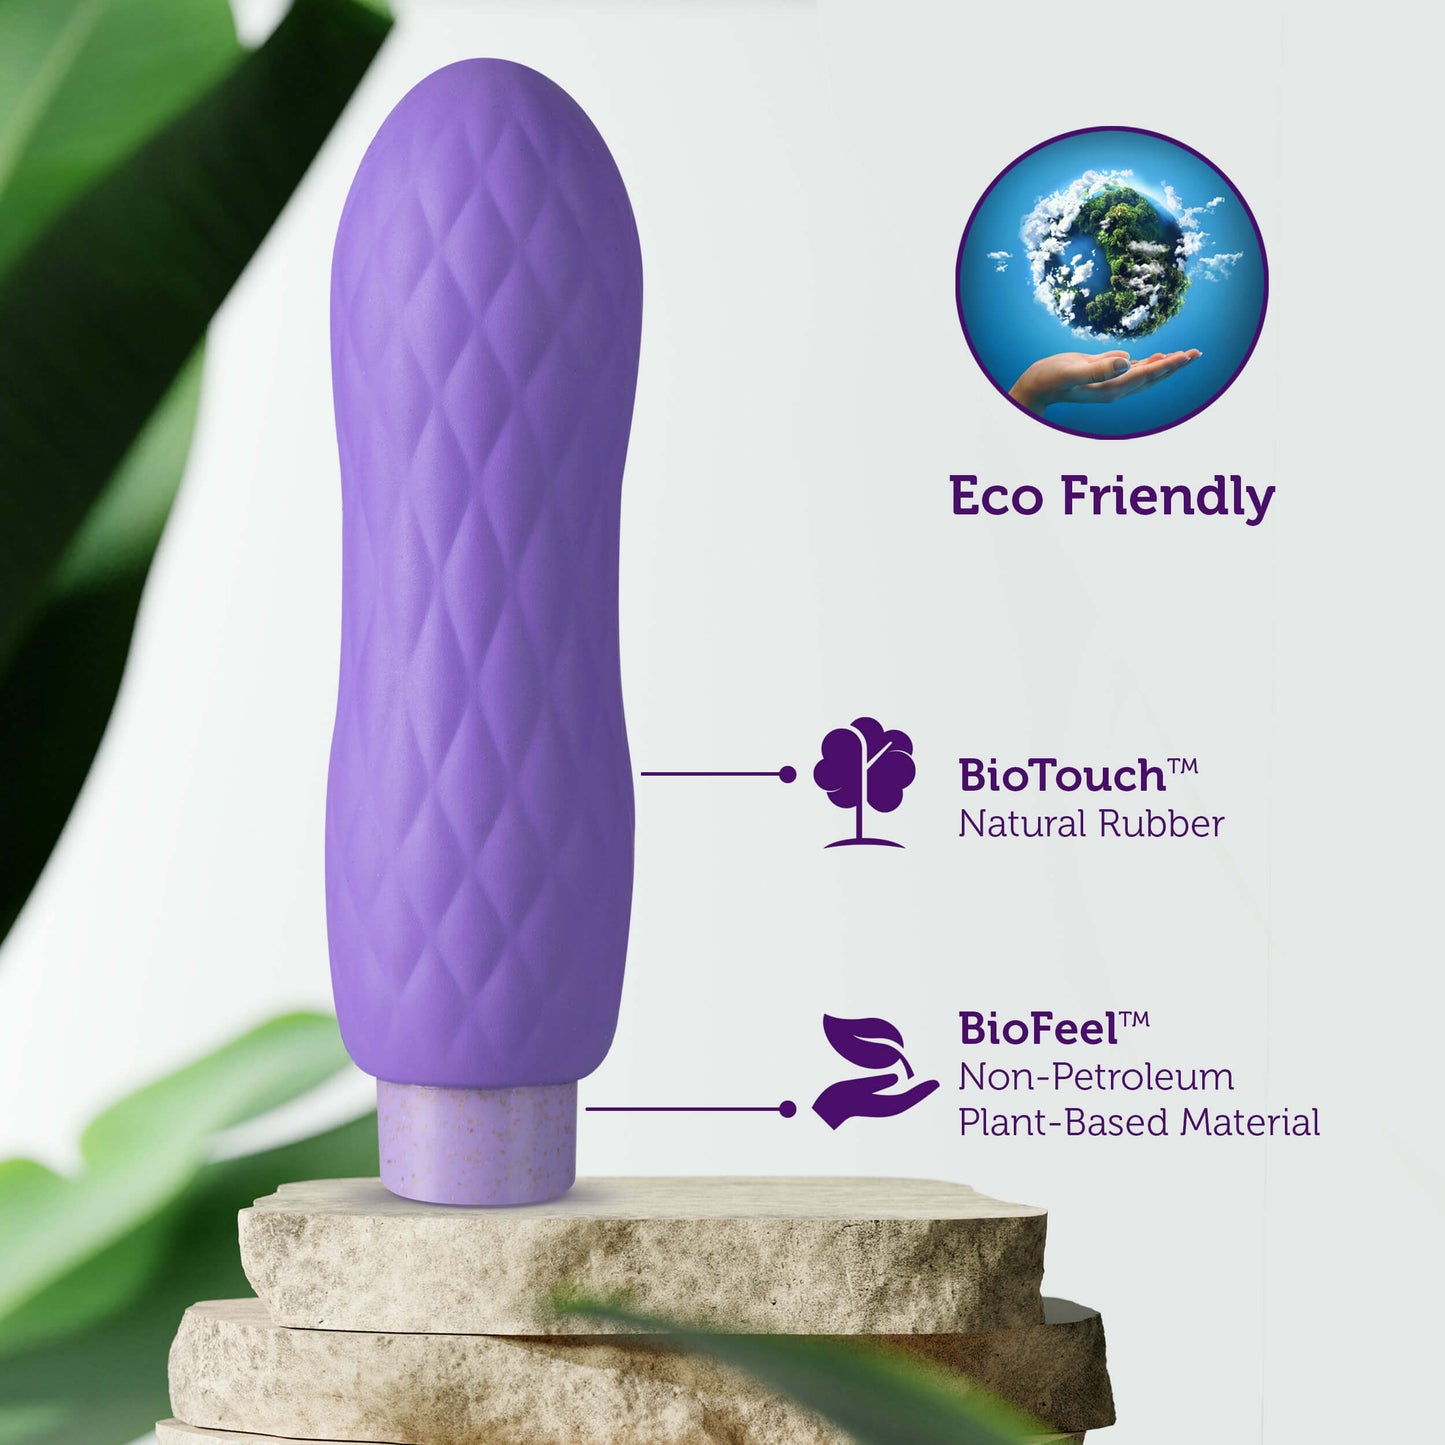 Blush Gaia Eco Bliss Eco Friendly - by The Bigger O online sex toy shop. USA, Canada and UK shipping available.